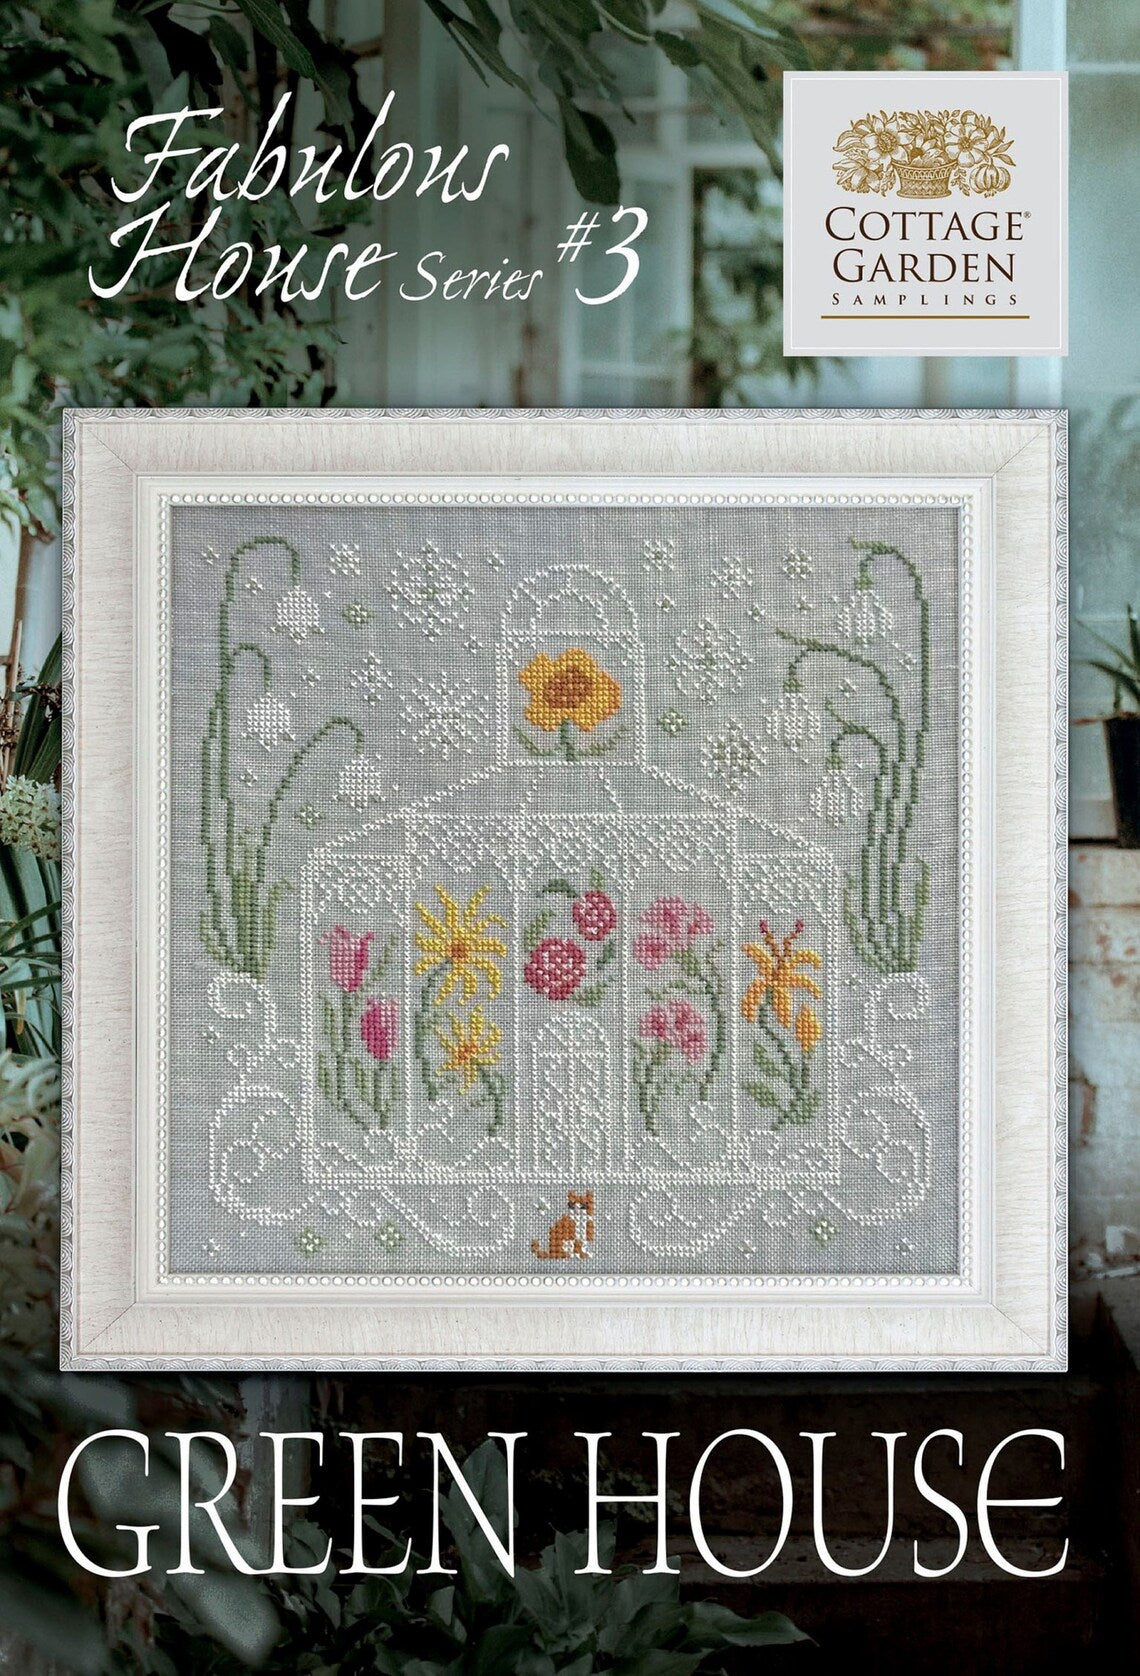 Fabulous House #3 Greenhouse by Cottage Garden Samplings Cross Stitch Pattern PHYSICAL copy